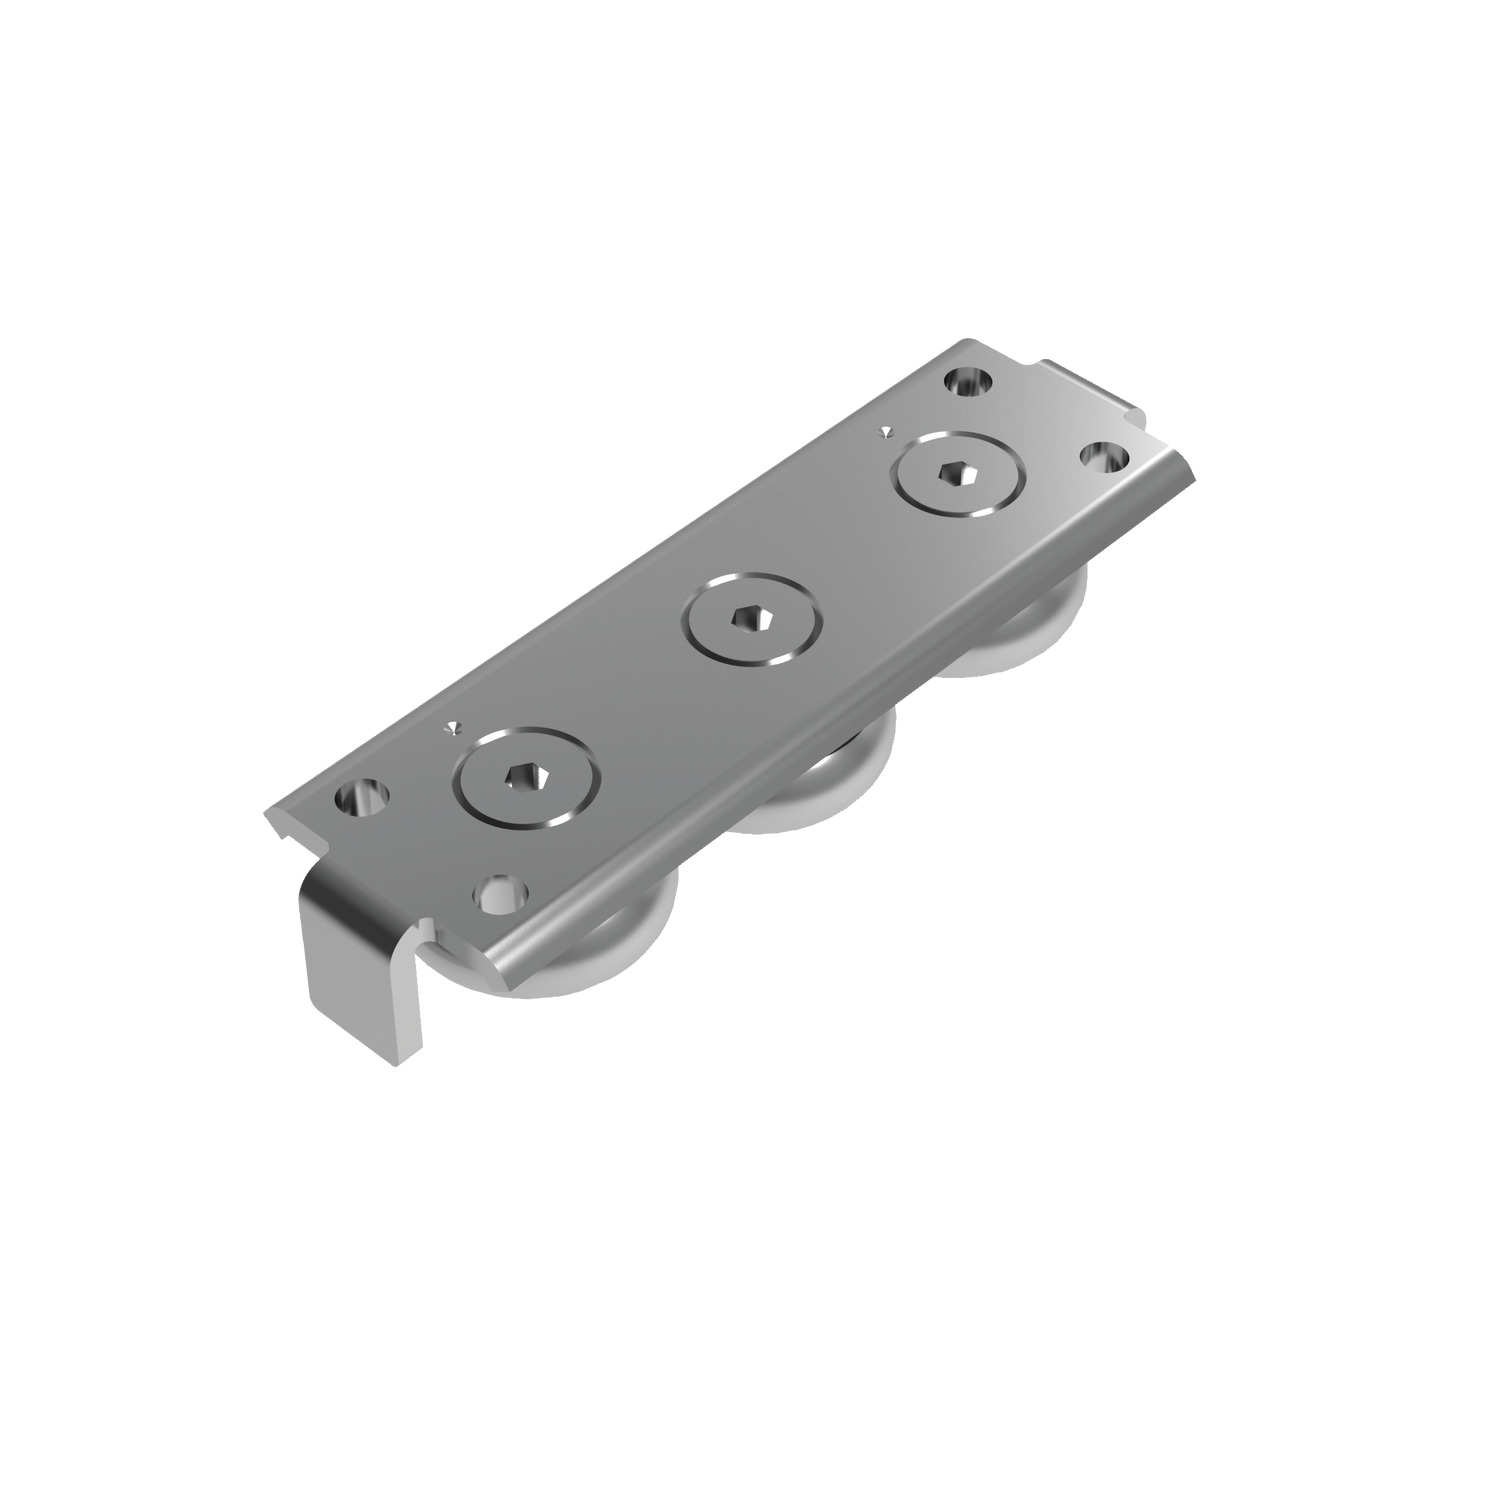 Low Profile Stainless Sliders Stainless steel 316 linear carriages - three different rail widths.